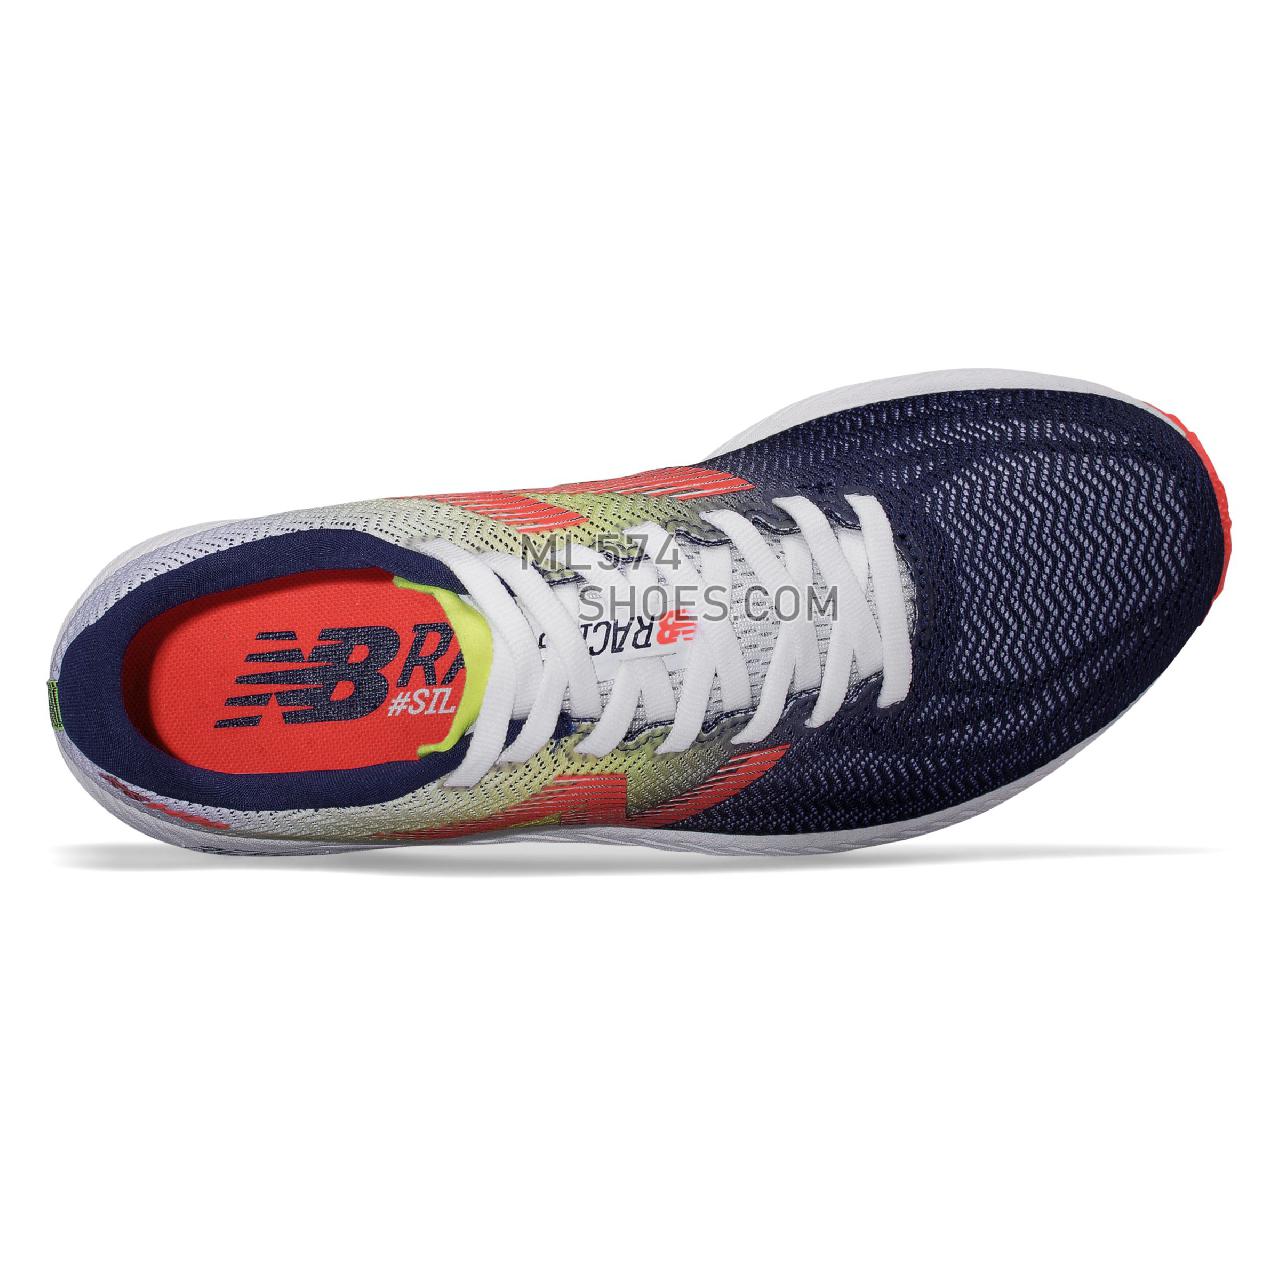 New Balance 1400v6 - Women's 1400 - Running White with Pigment and Vivid Coral - W1400BP6